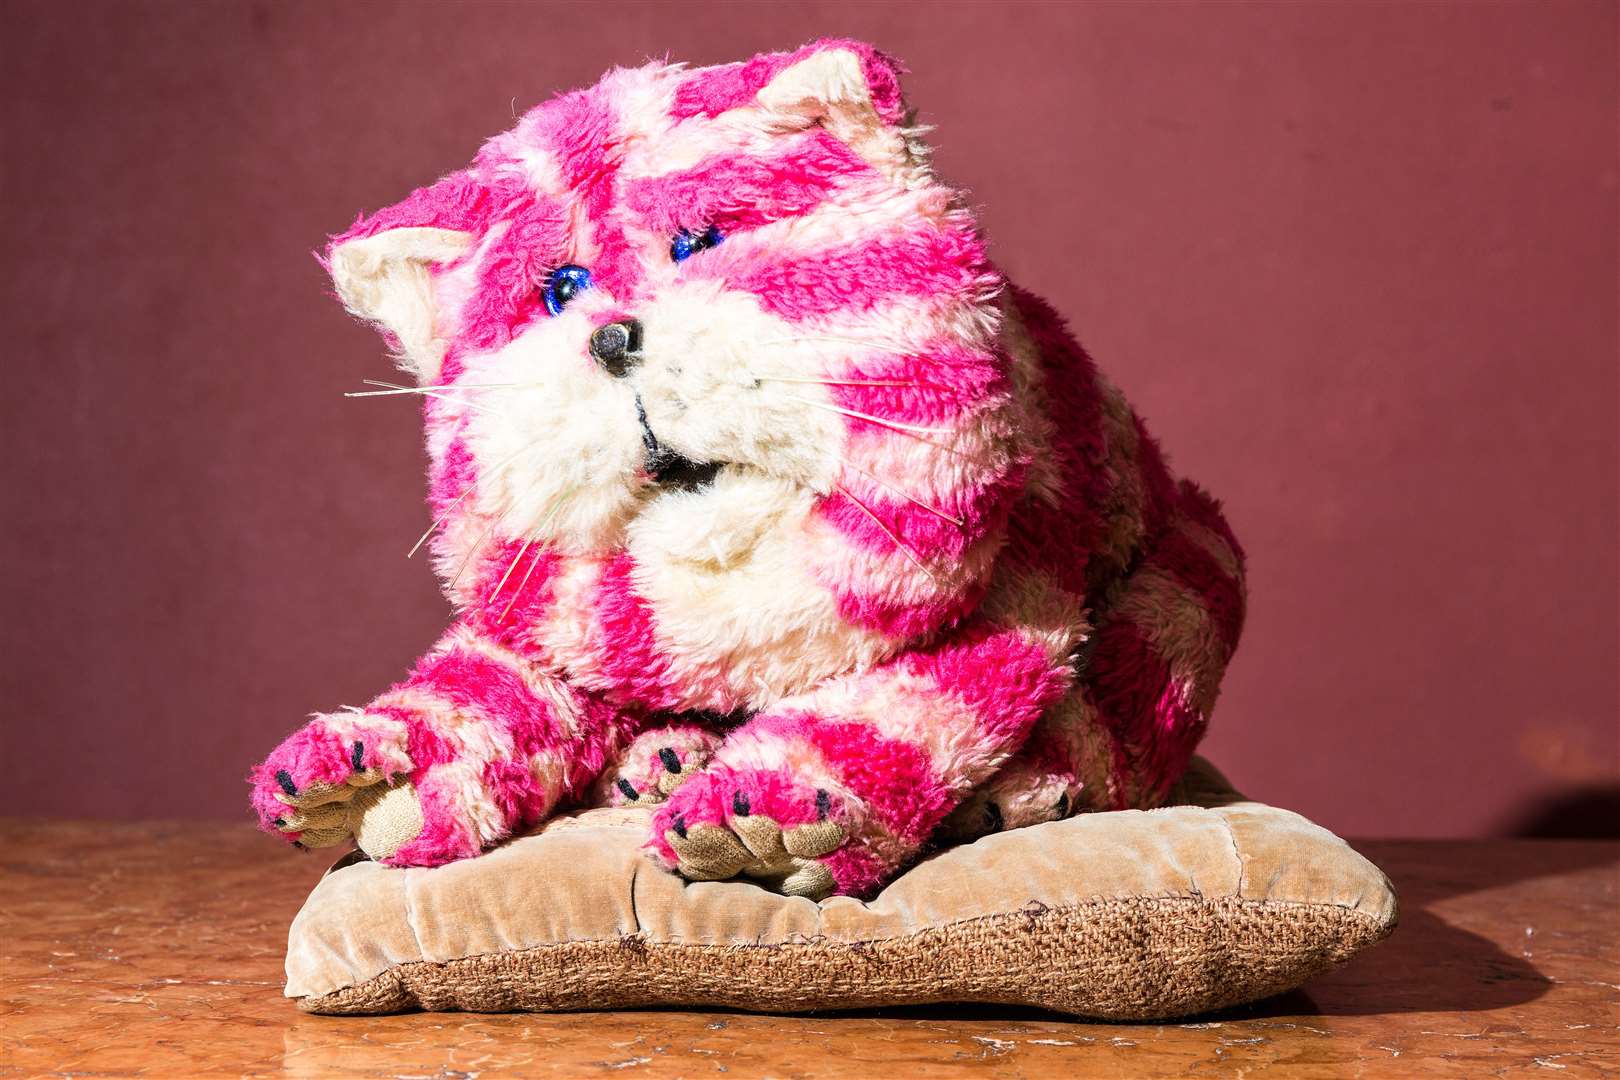 See Bagpuss at The Beaney